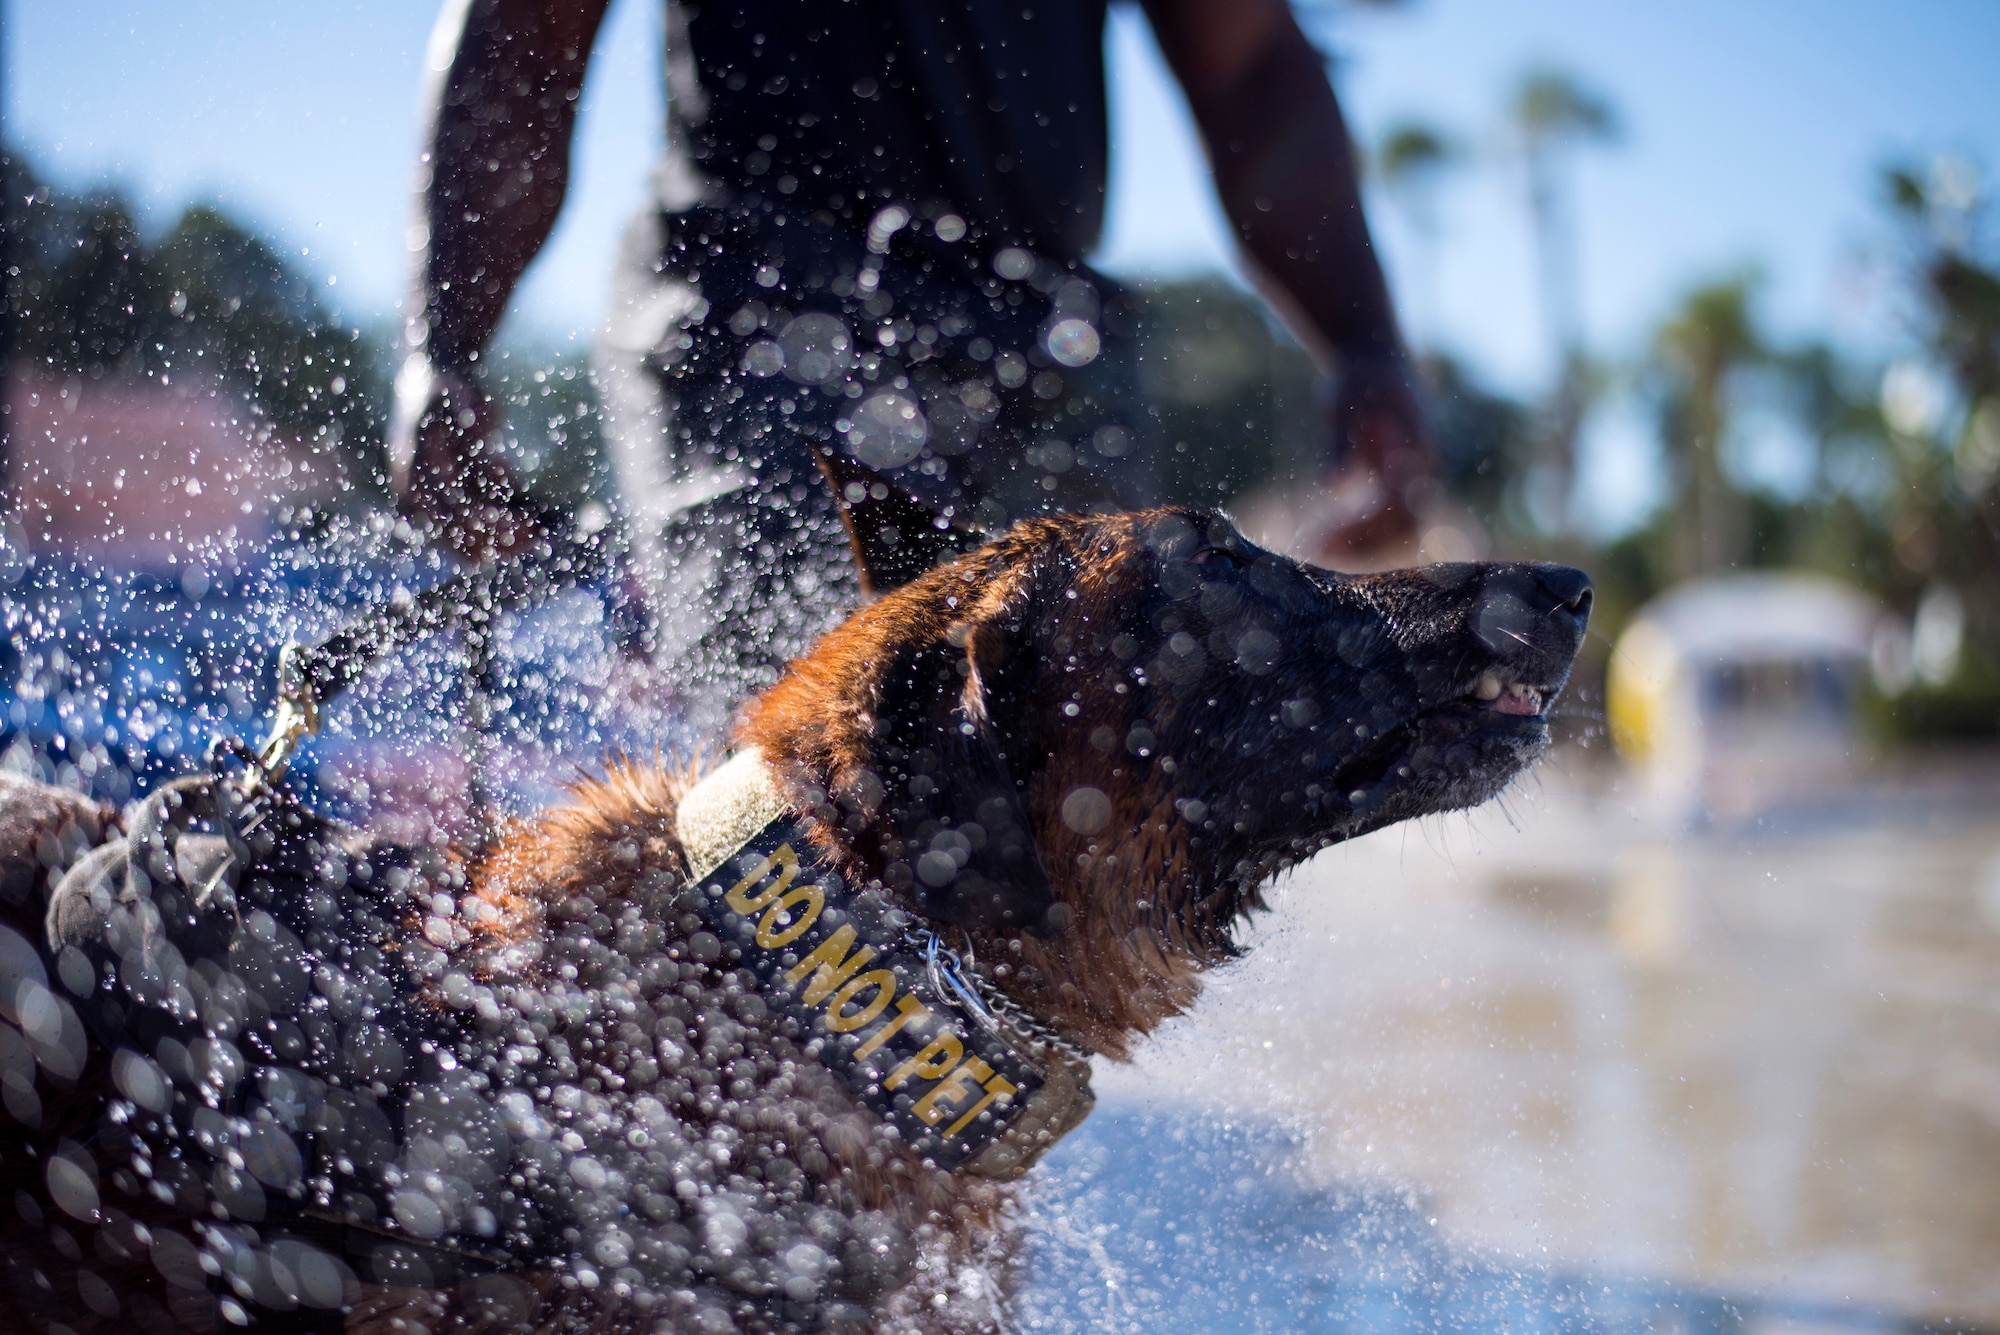 U.S. Air Force 6th Security Forces Squadron military working dog, Lleonard, shakes off water during a water aggression training exercise at Adventure Island, Tampa, Fla. Oct. 29, 2018.